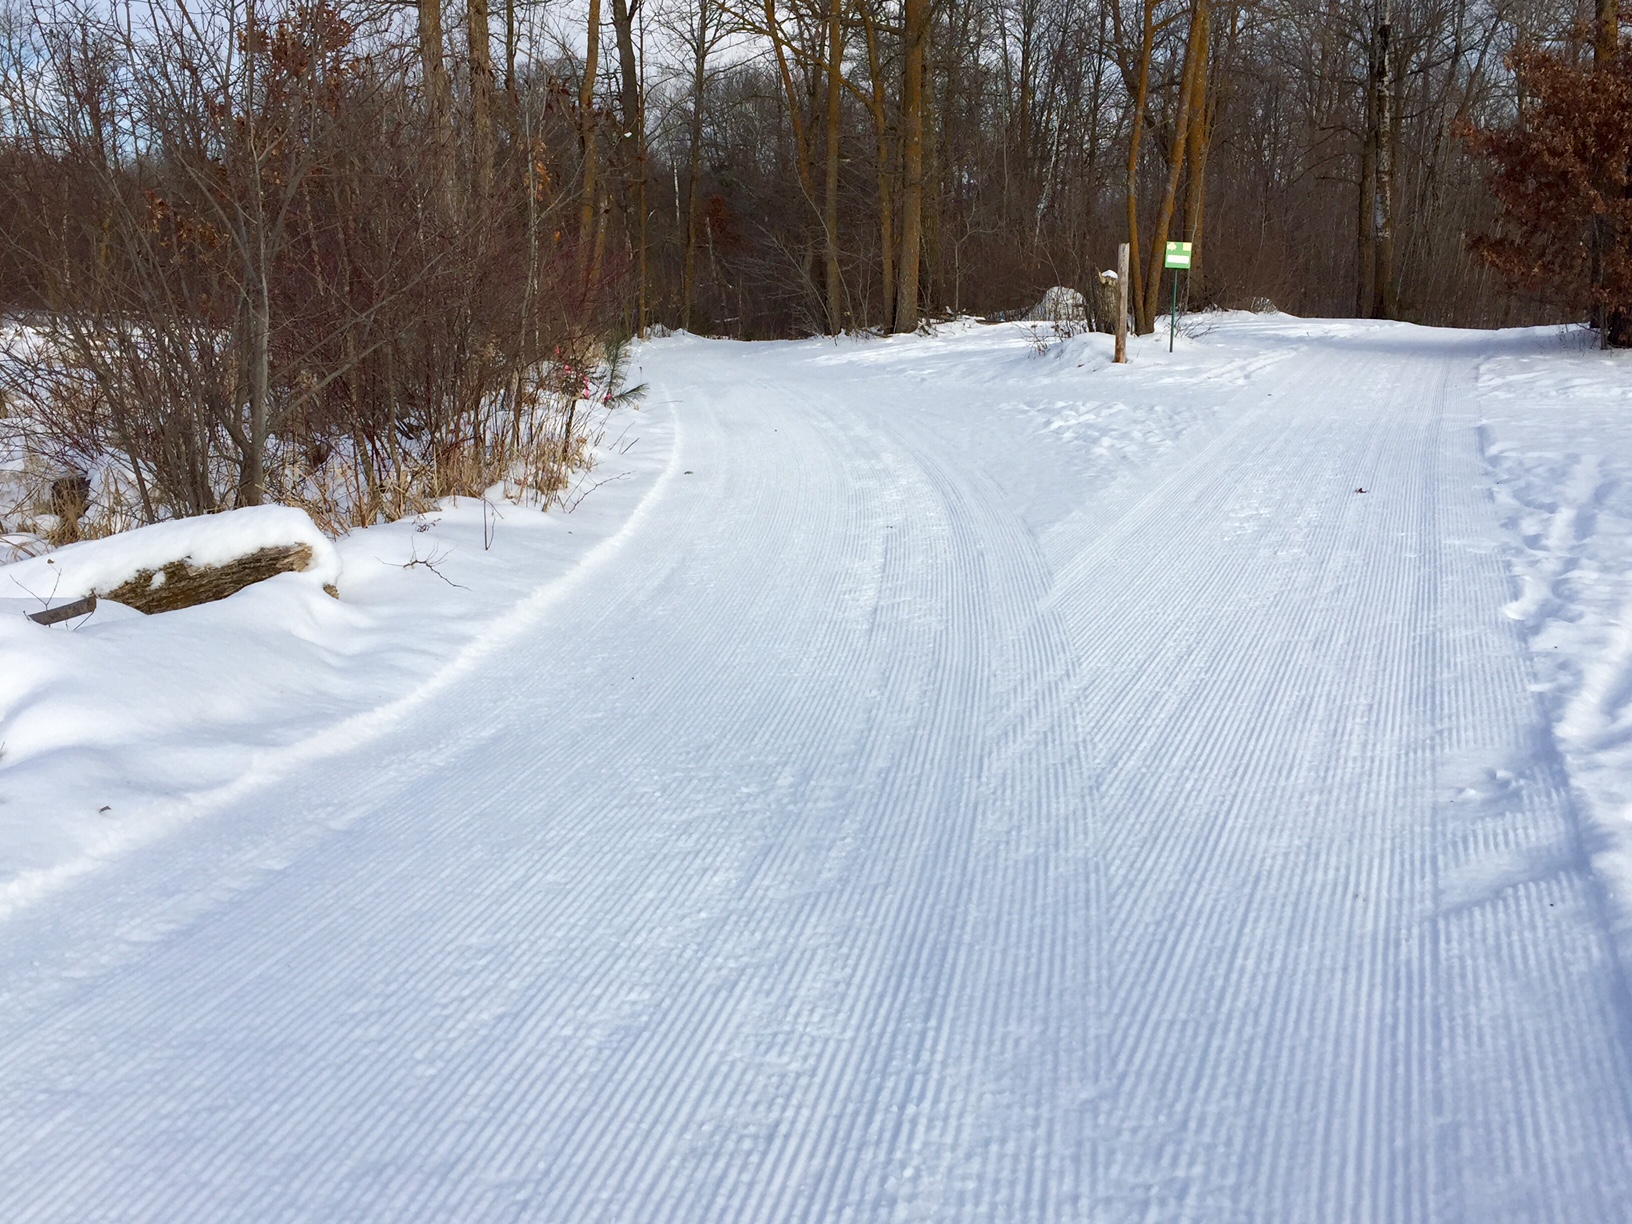 Skaters extension after grooming January 29th, 2016. Bit softer surface deck on top of firm base on Skaters extension. Super skiing on Friday. Grooming again Saturday morning.